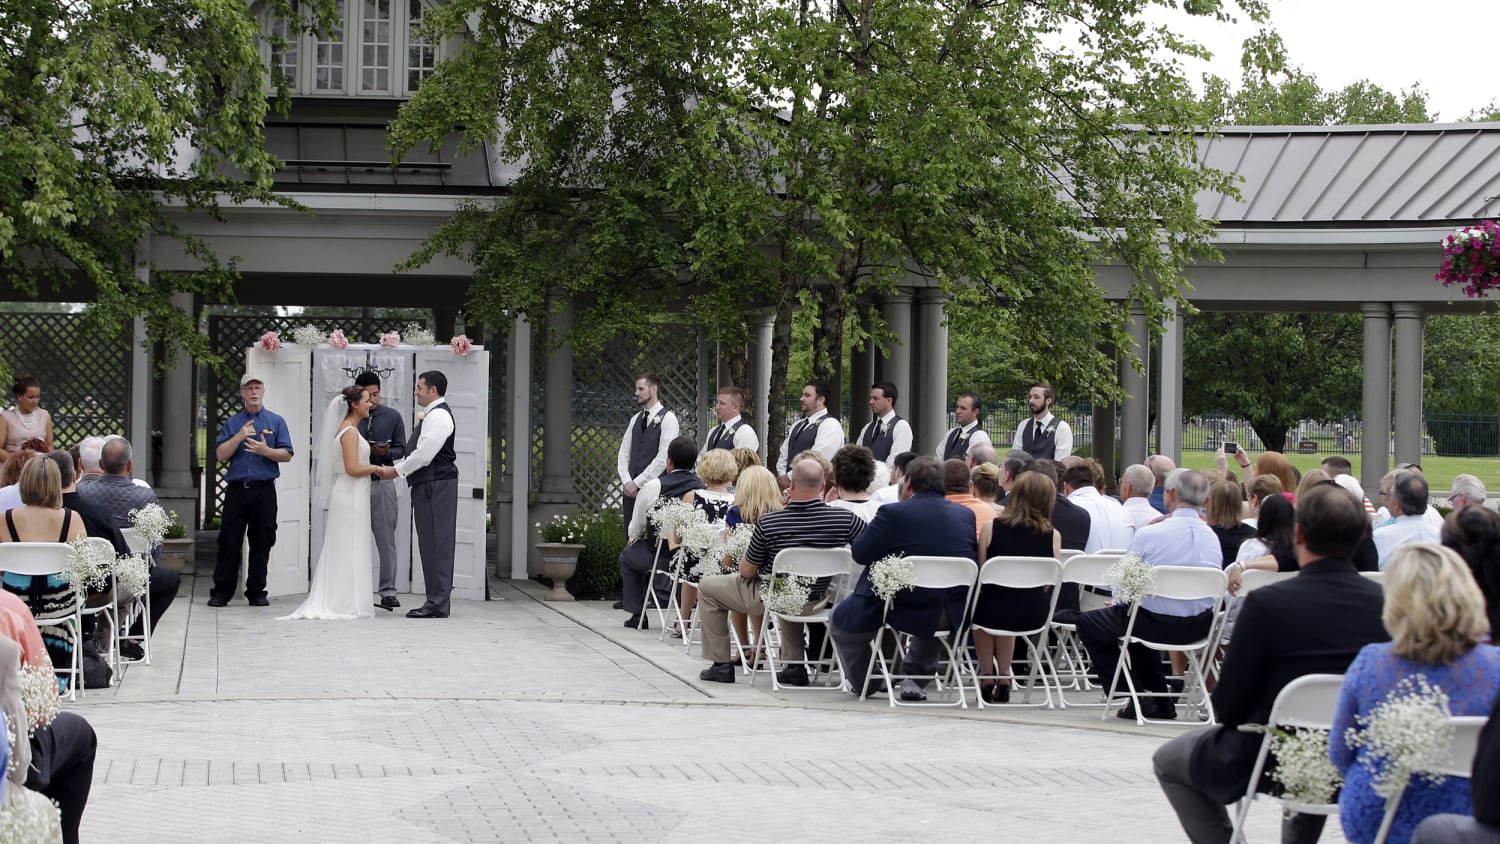 Getting married at a funeral home? More couples say ‘I do’ to new wedding trend ...2500 x 1407